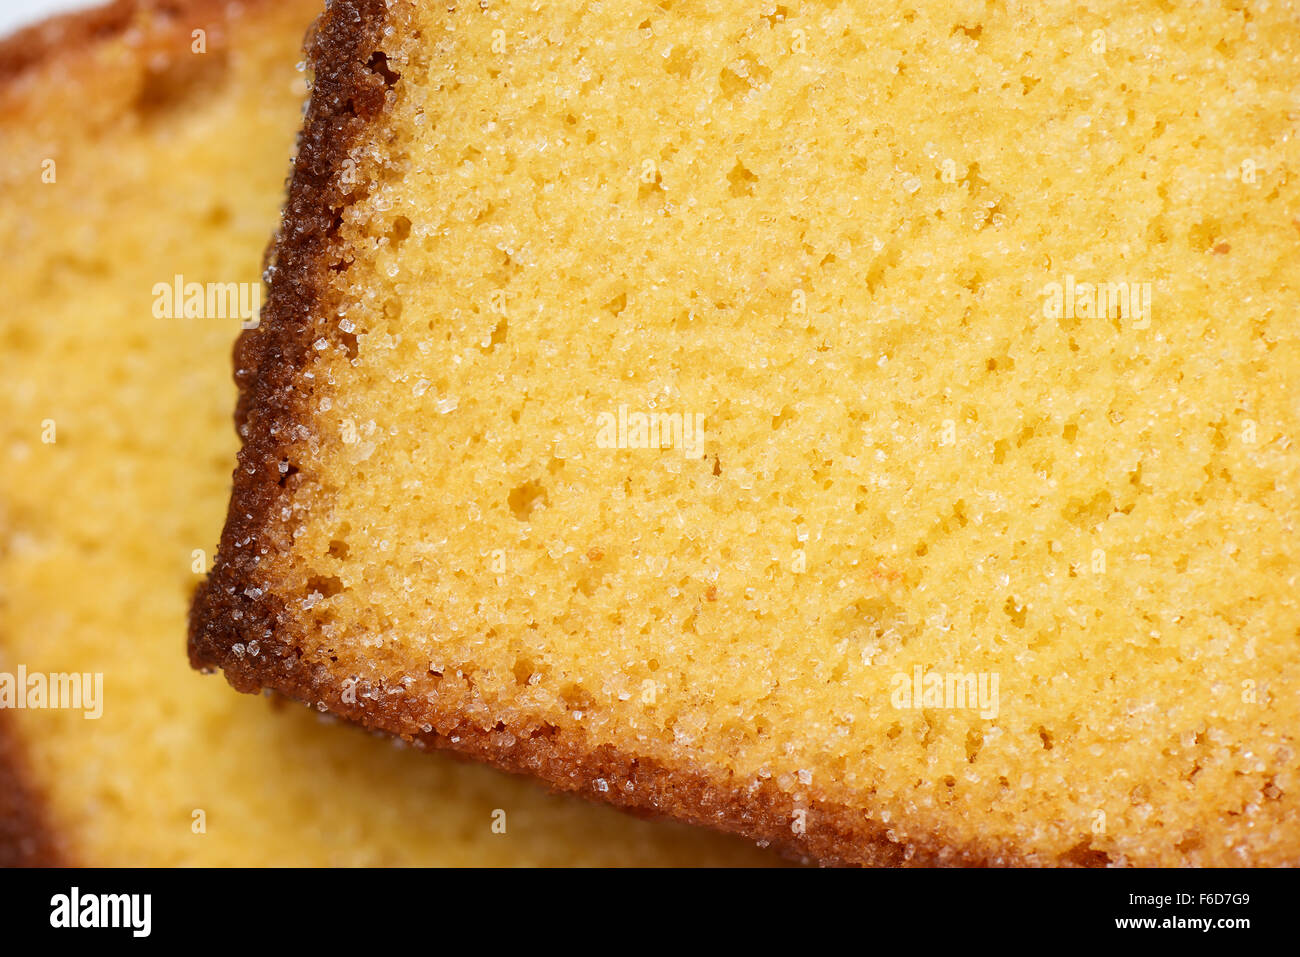 crispy baked bread with butter and sugar Stock Photo